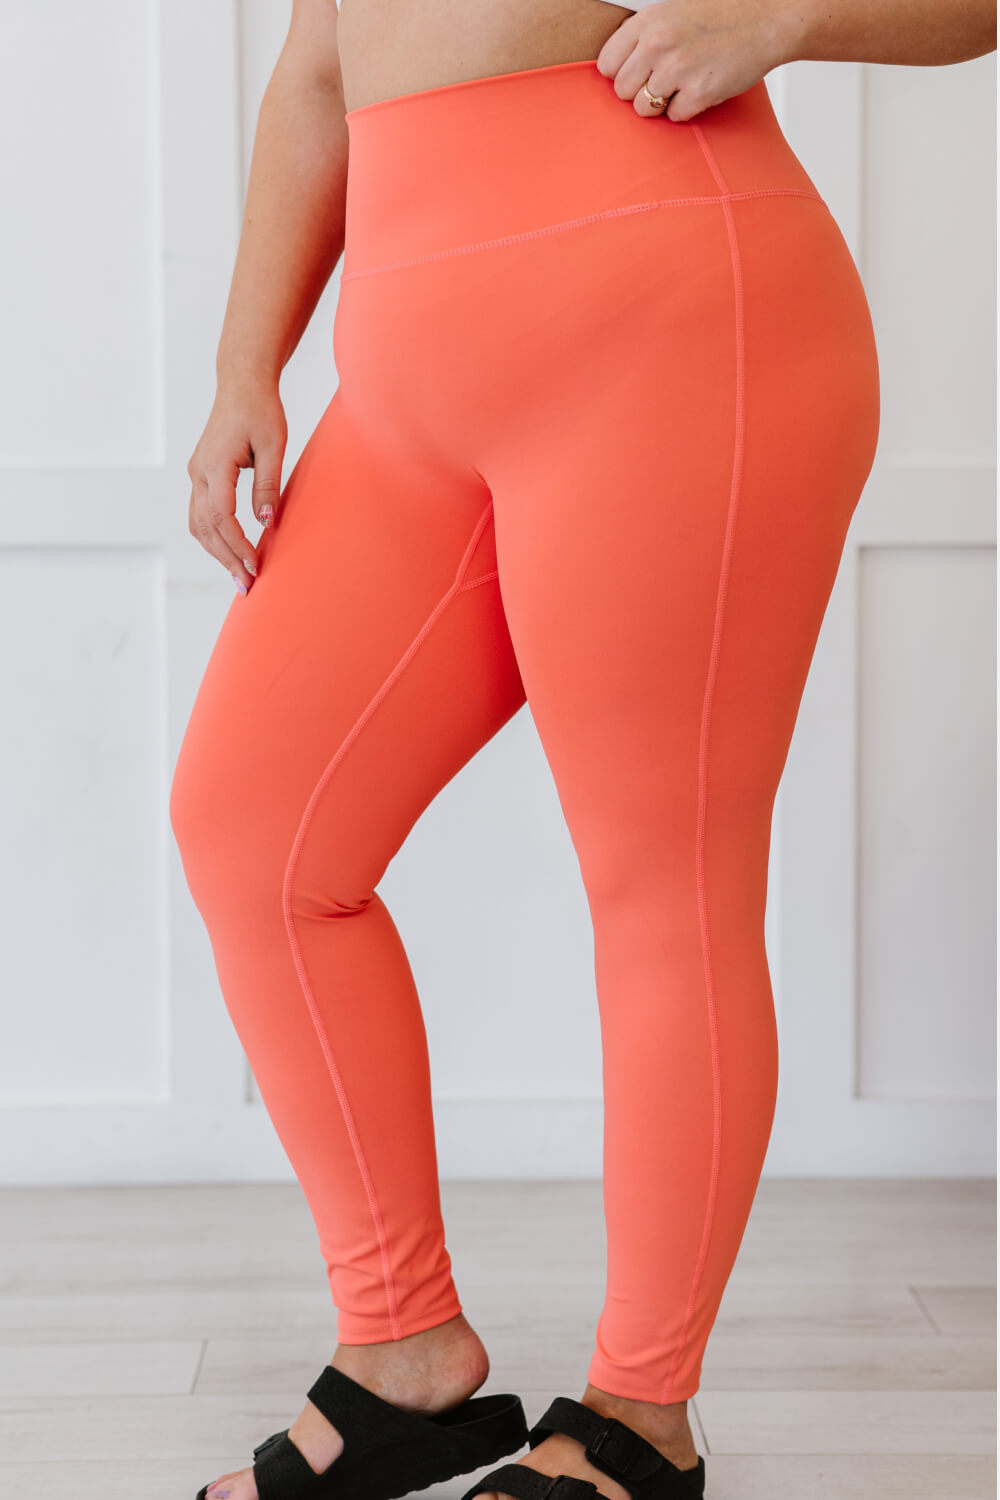 Zenana On Your Mark Full Size High Waisted Active Leggings in Deep Coral - PINKCOLADA